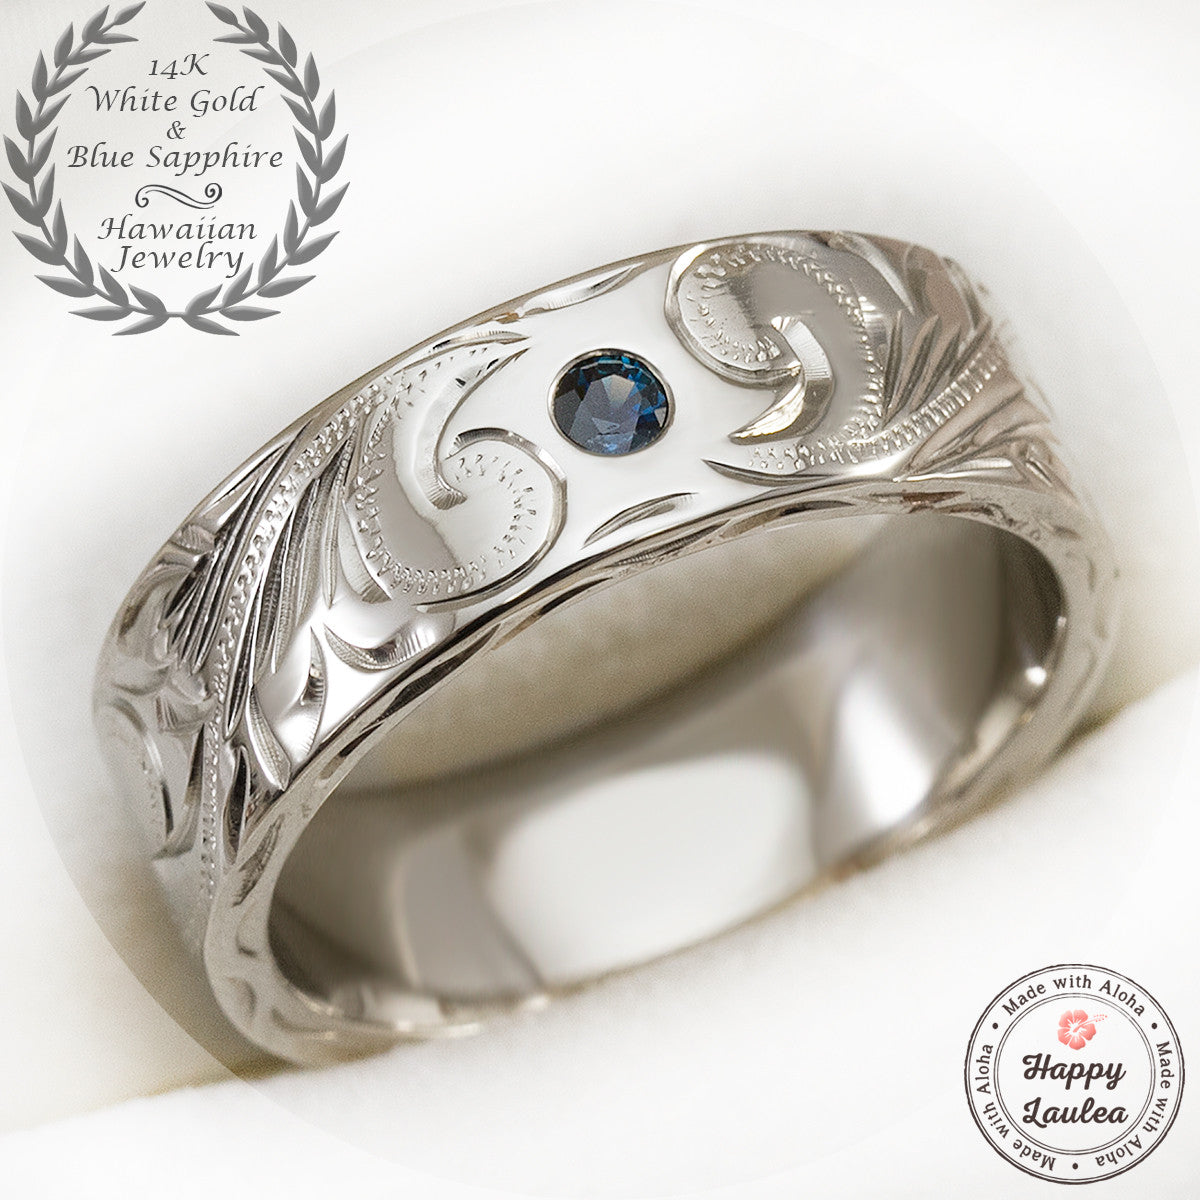 14K White Gold Wedding Ring Hand Engraved Hawaiian Heritage Design with Blue Sapphire Setting - 8x2mm, Flat Shape, Standard Fitment